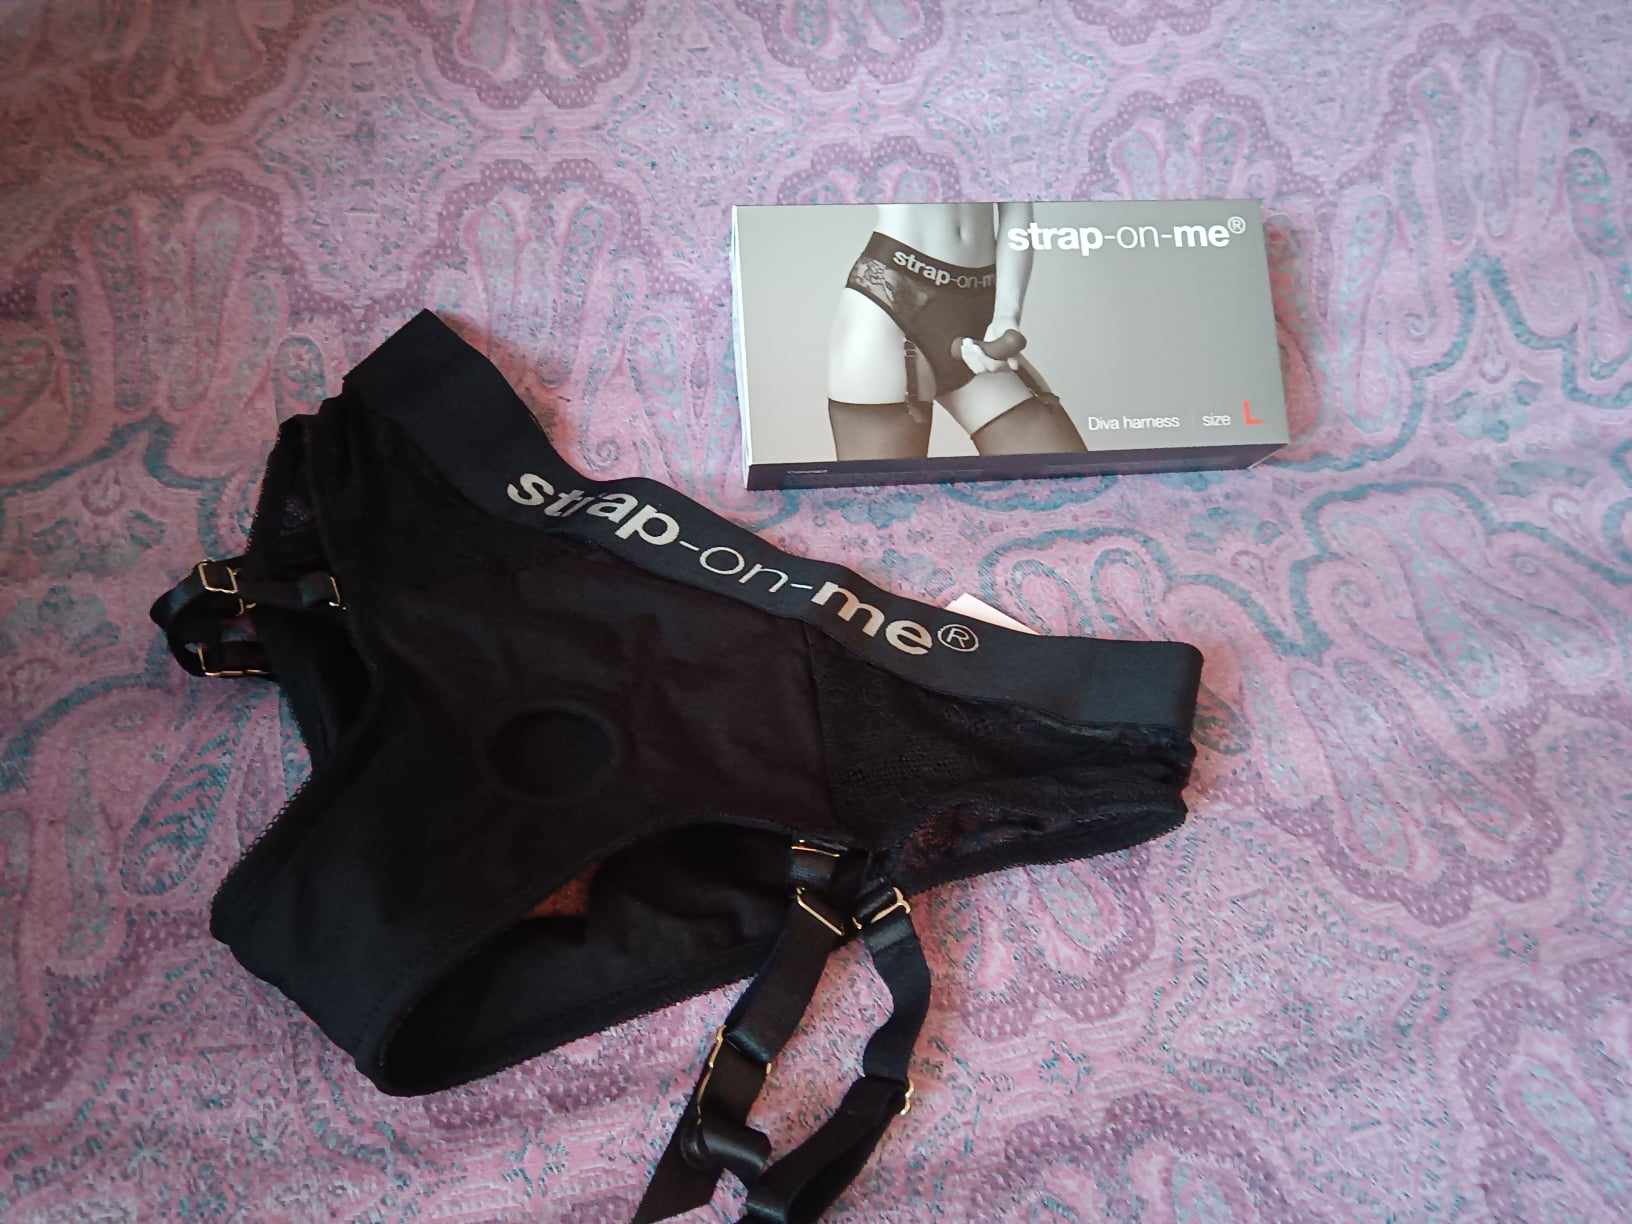 Strap-On-Me Diva Harness The Strap-On-Me Diva Lingerie Harness: Presentation and Packaging